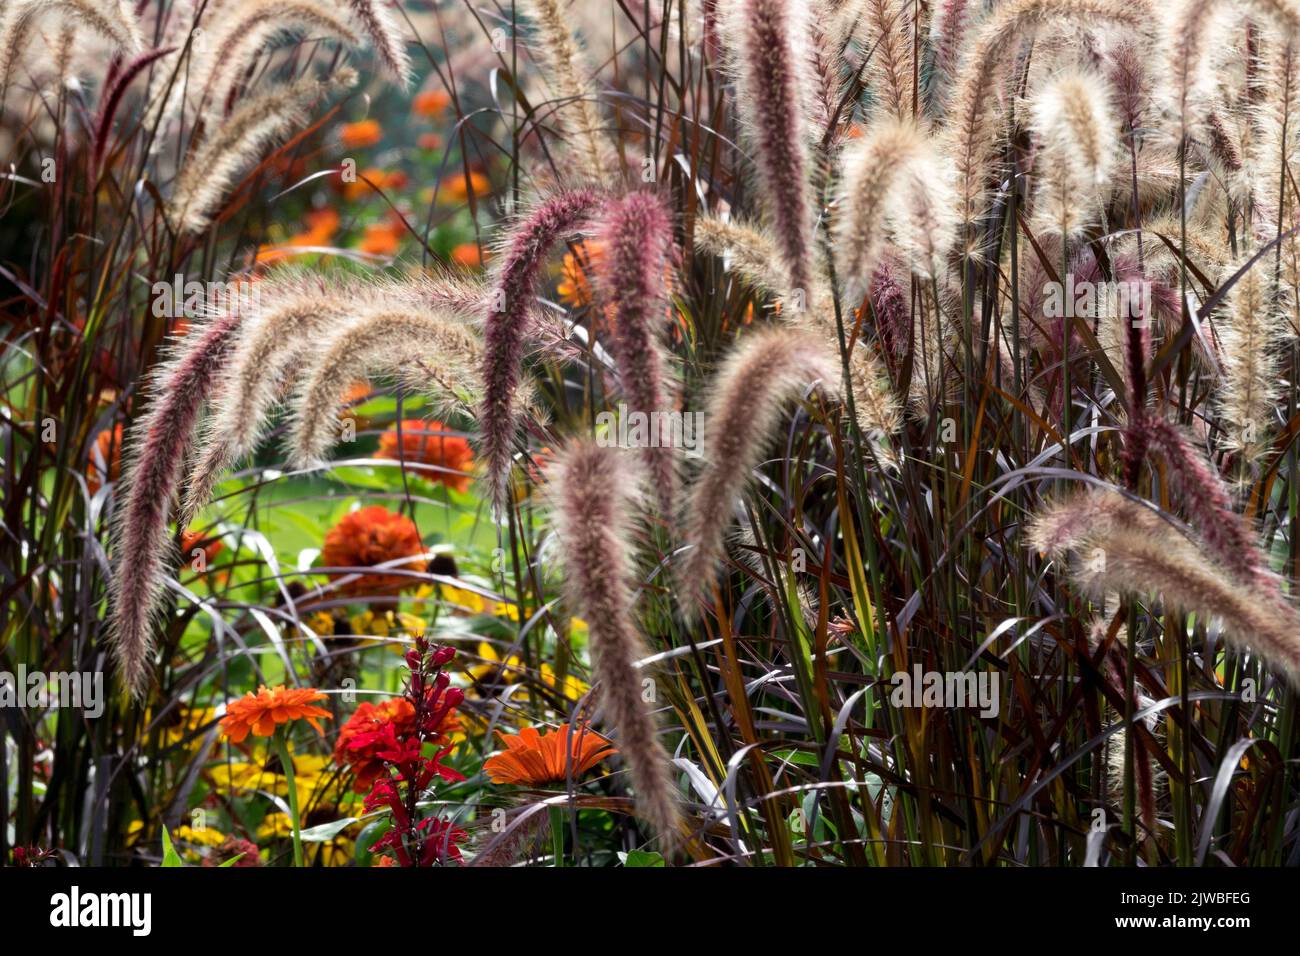 Pennisetum setaceum 'Rubrum', Fountain Grass, Pennisetum Rubrum is a loose branching cluster of flowers with beautiful purple panicles, tall grass Stock Photo